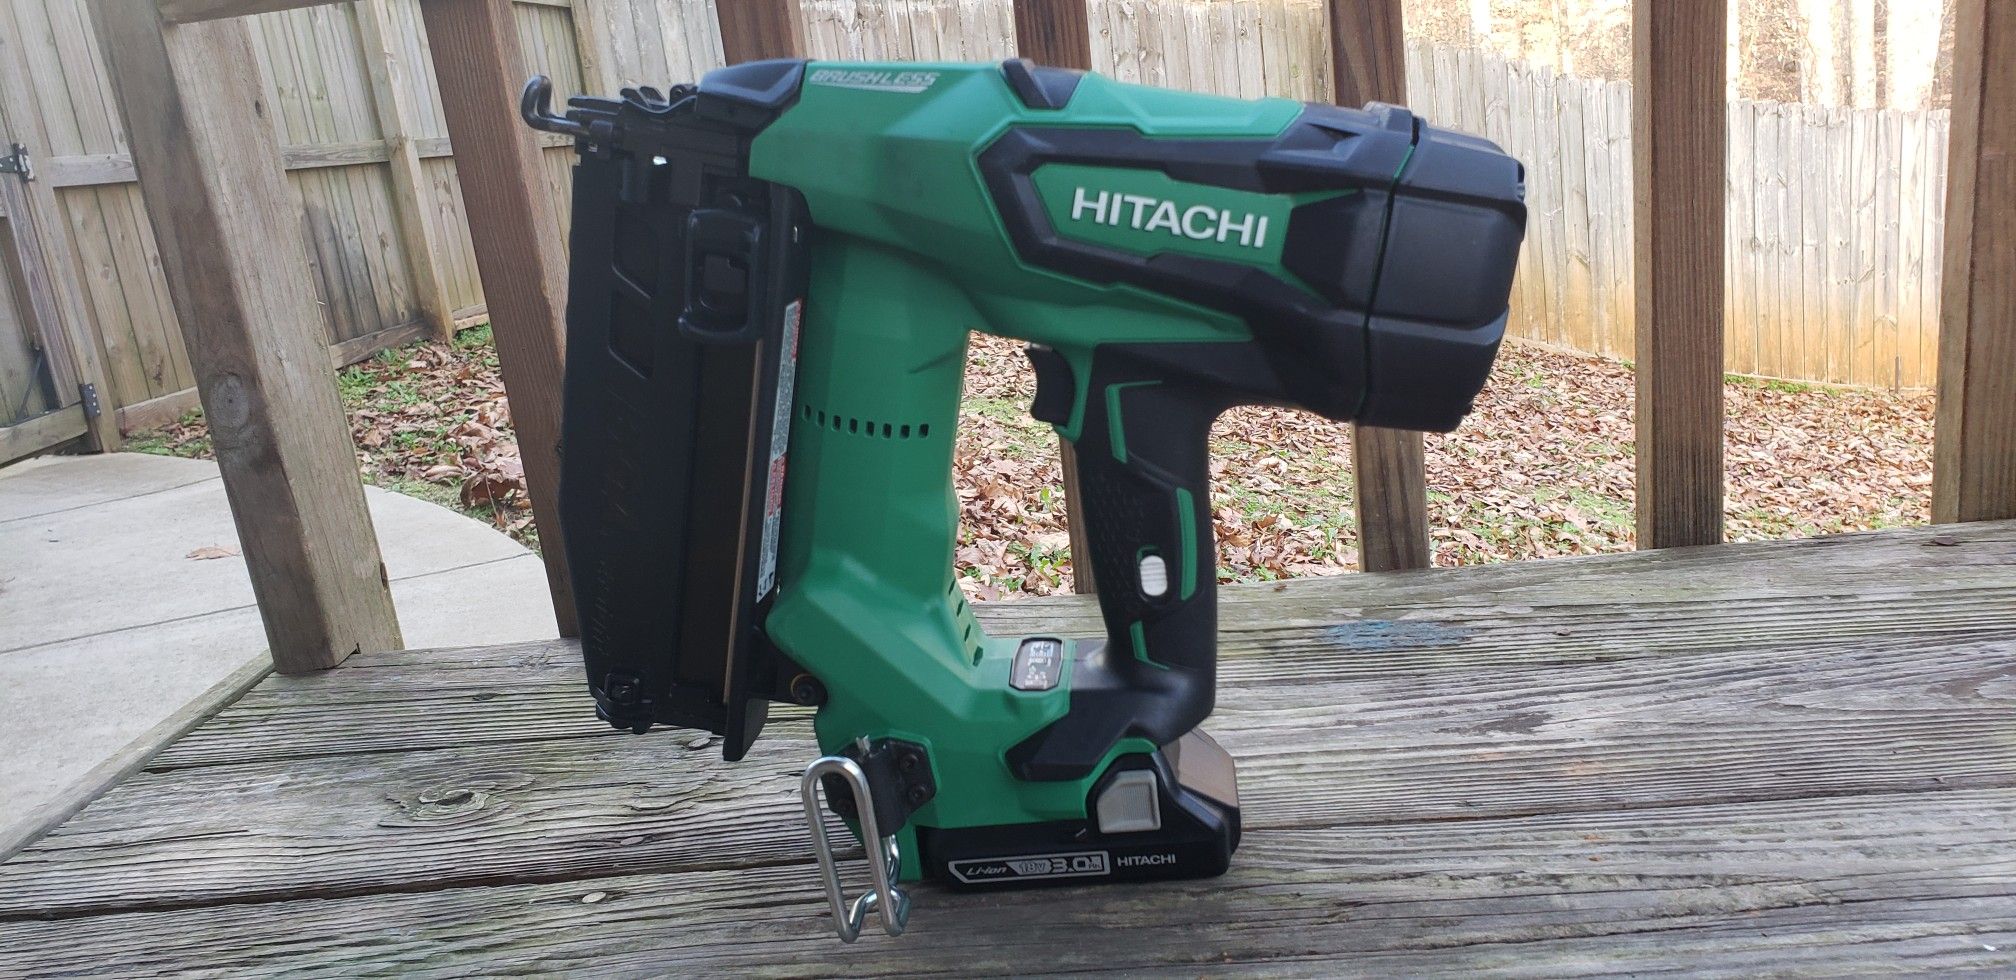 Hitachi NT1865DM 18V Cordless Straight Finish Nailer (Without Charger)